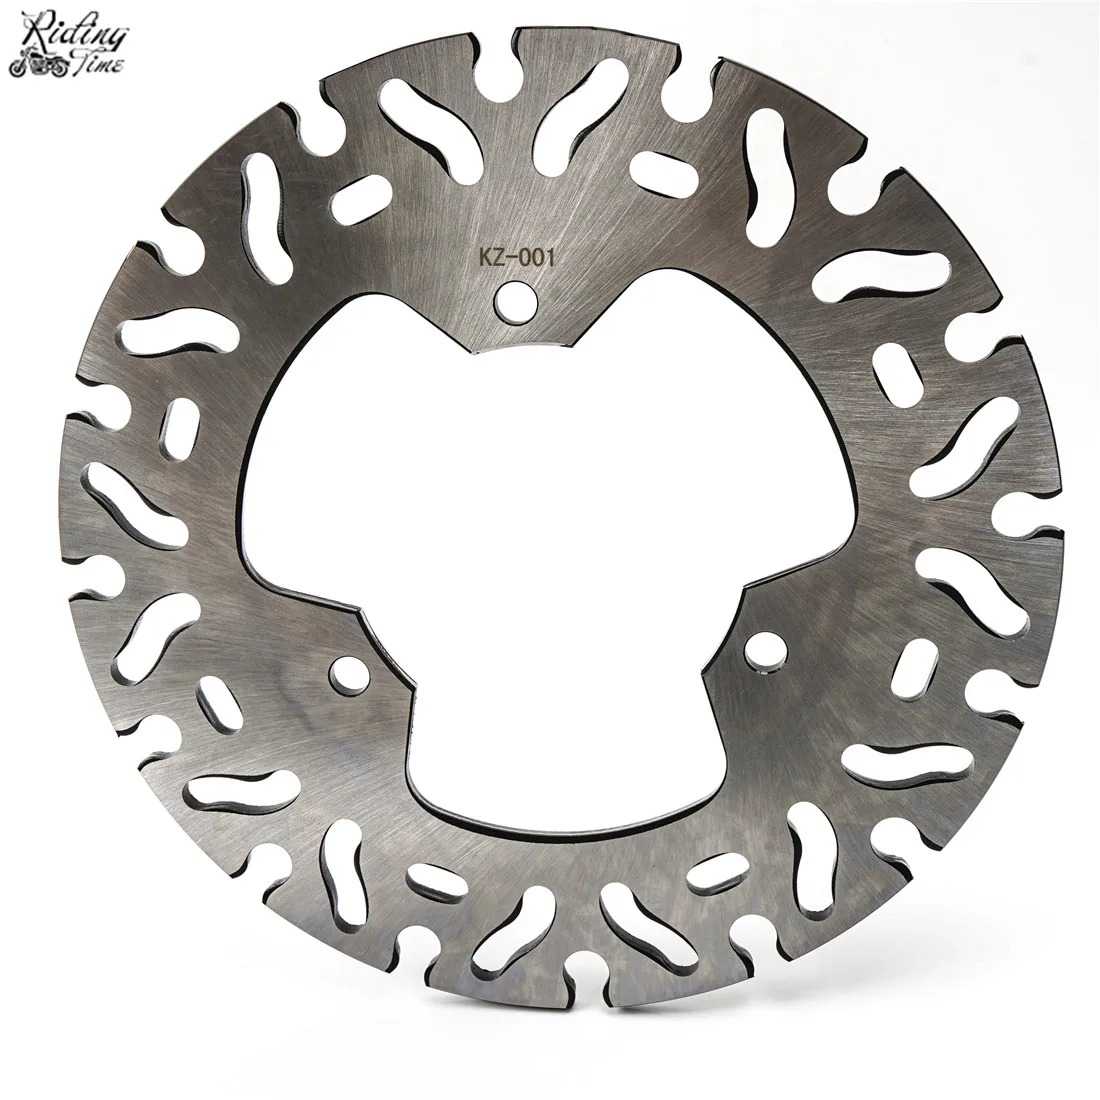 Motorcycle Rear Brake Disc Rotor For Yamaha TZR125 TZM150 TZR250 FZR250 FZR400